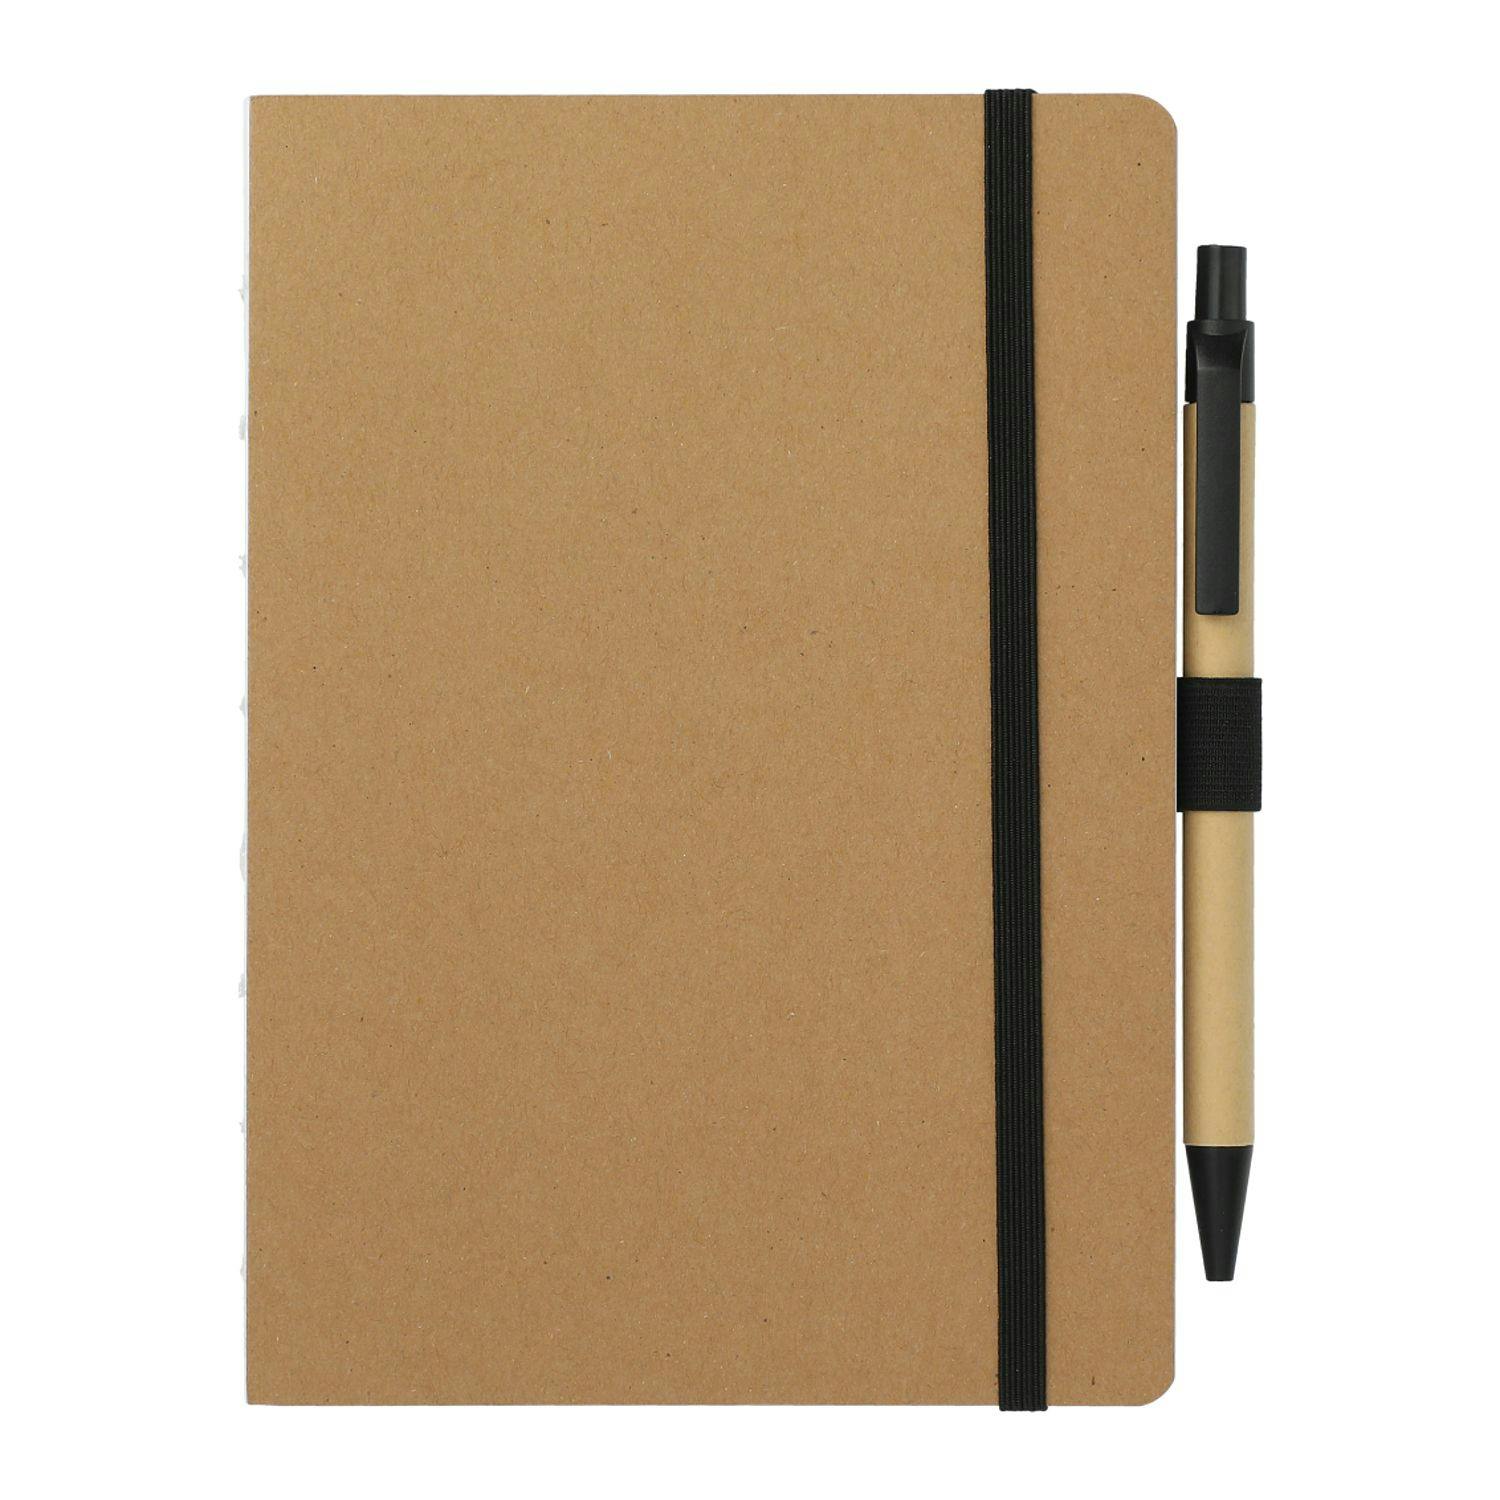 5" x 7" FSC Recycled Notebook and Pen Set - additional Image 1